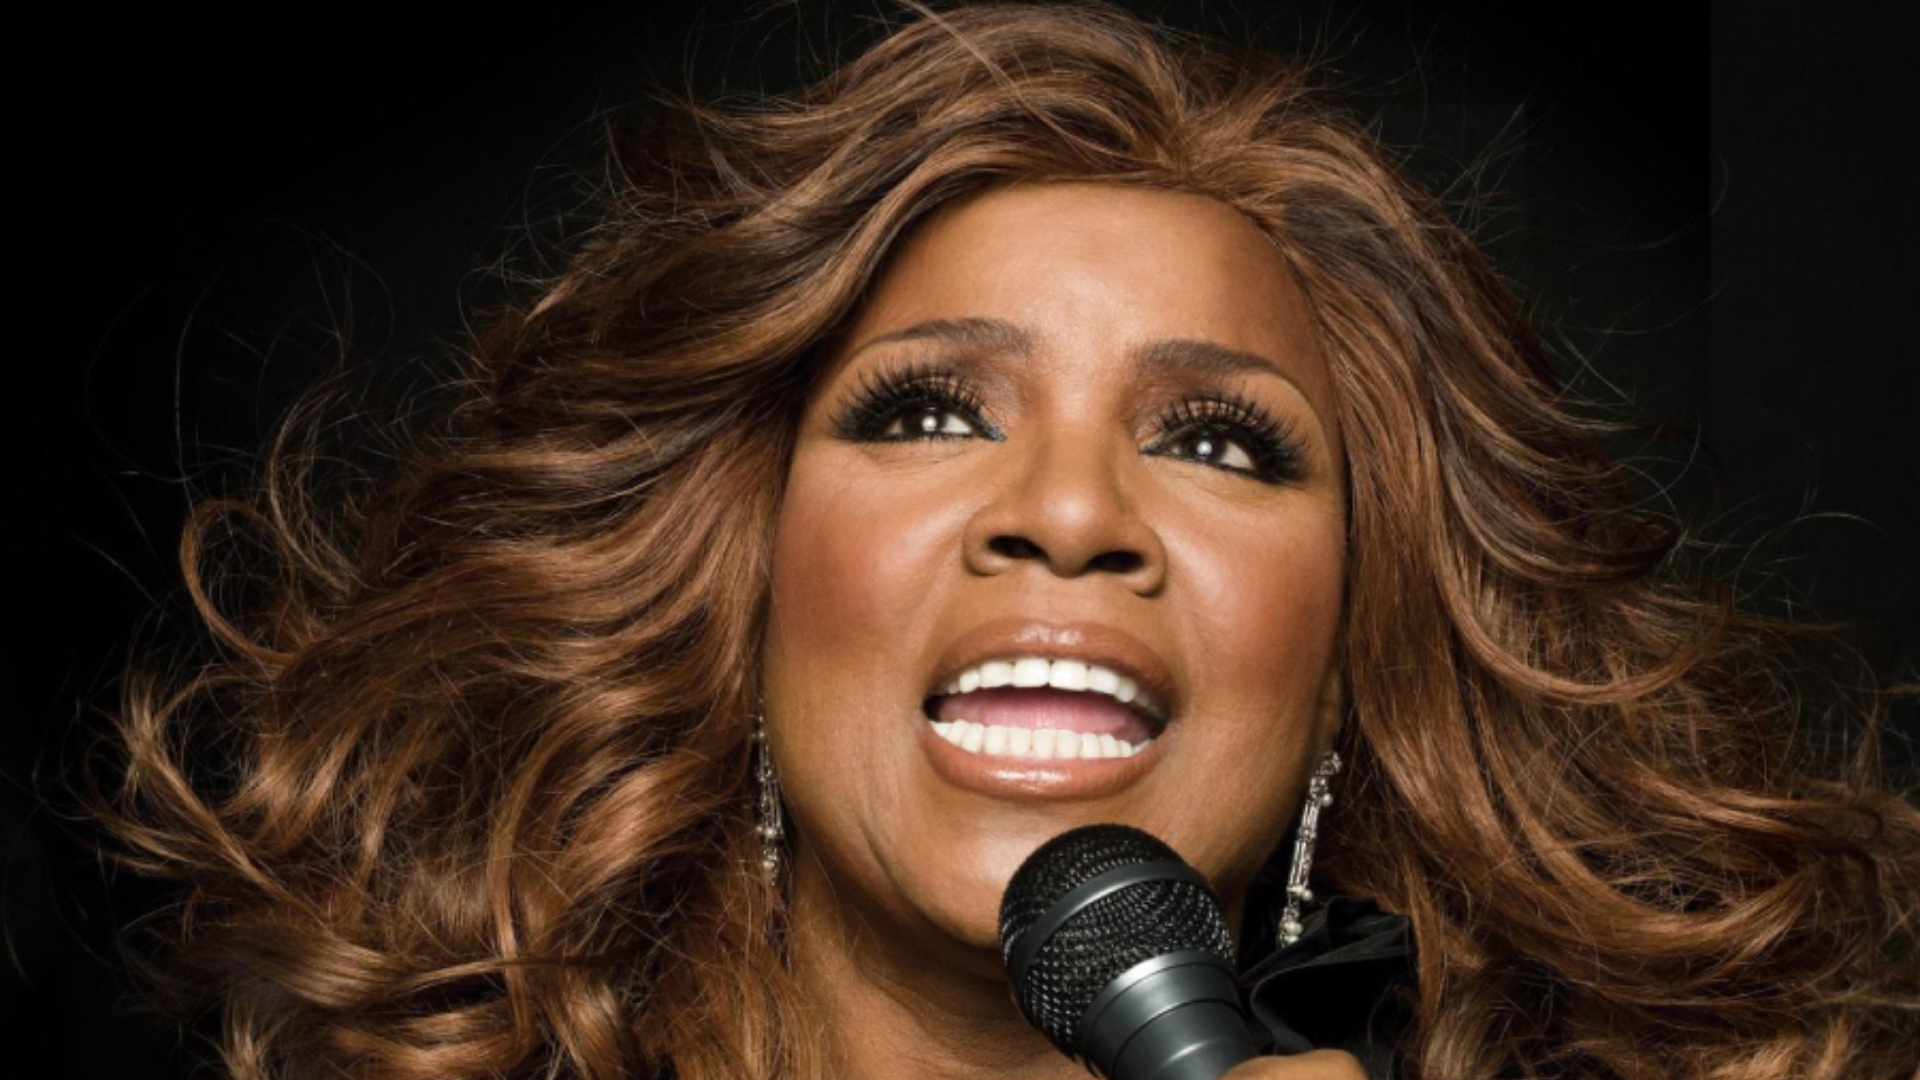 The Queen Of Disco Ms. Gloria Gaynor will be on stage at Yalıkavak Marina.